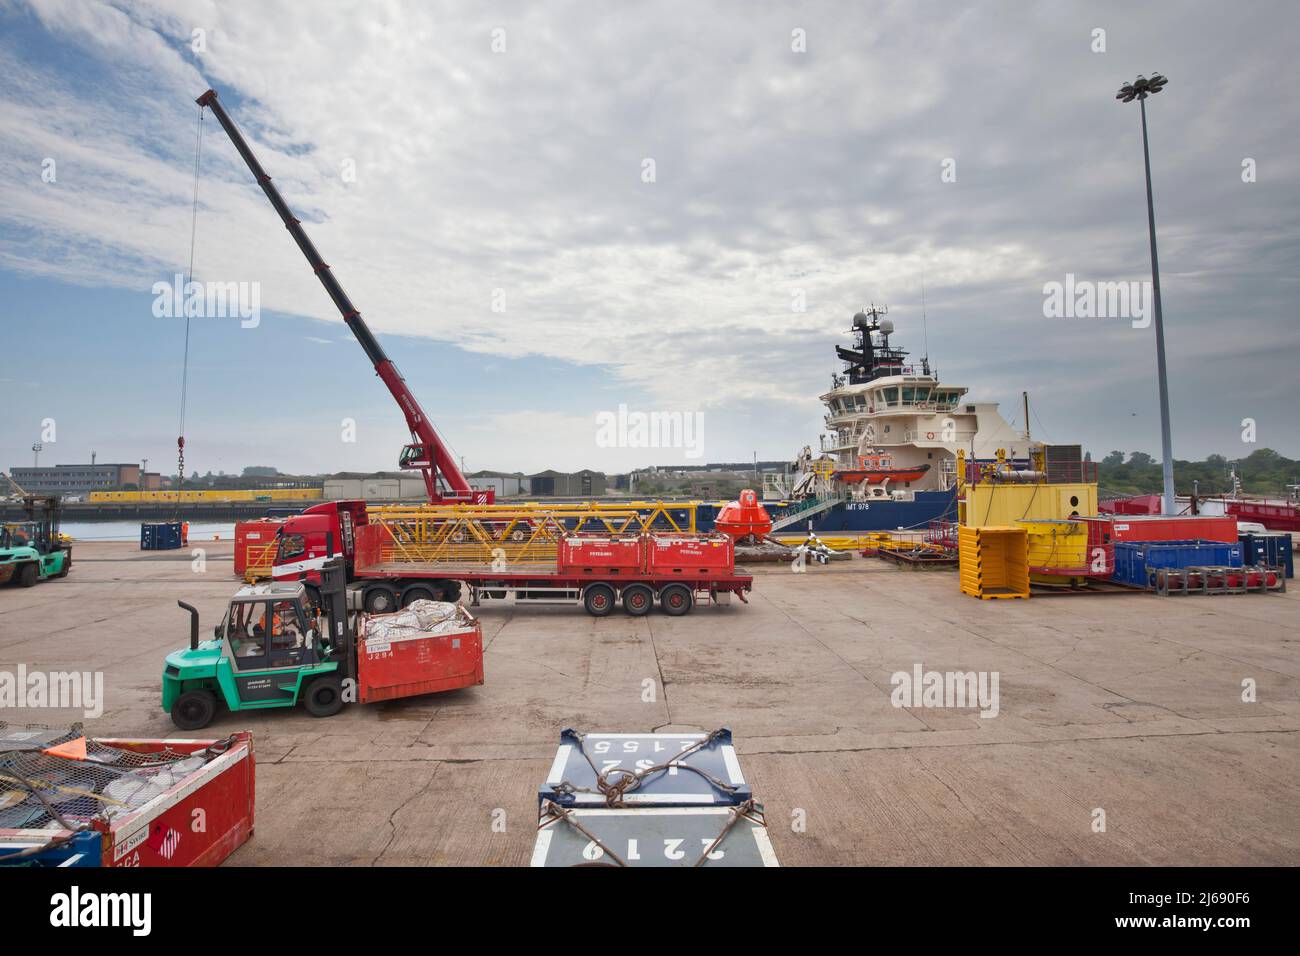 Loading and unloading of North Sea supply vessel, using 5 and 10 tonne Mitsubishi forklifts on Peterson's quay at Lowestoft. Stock Photo